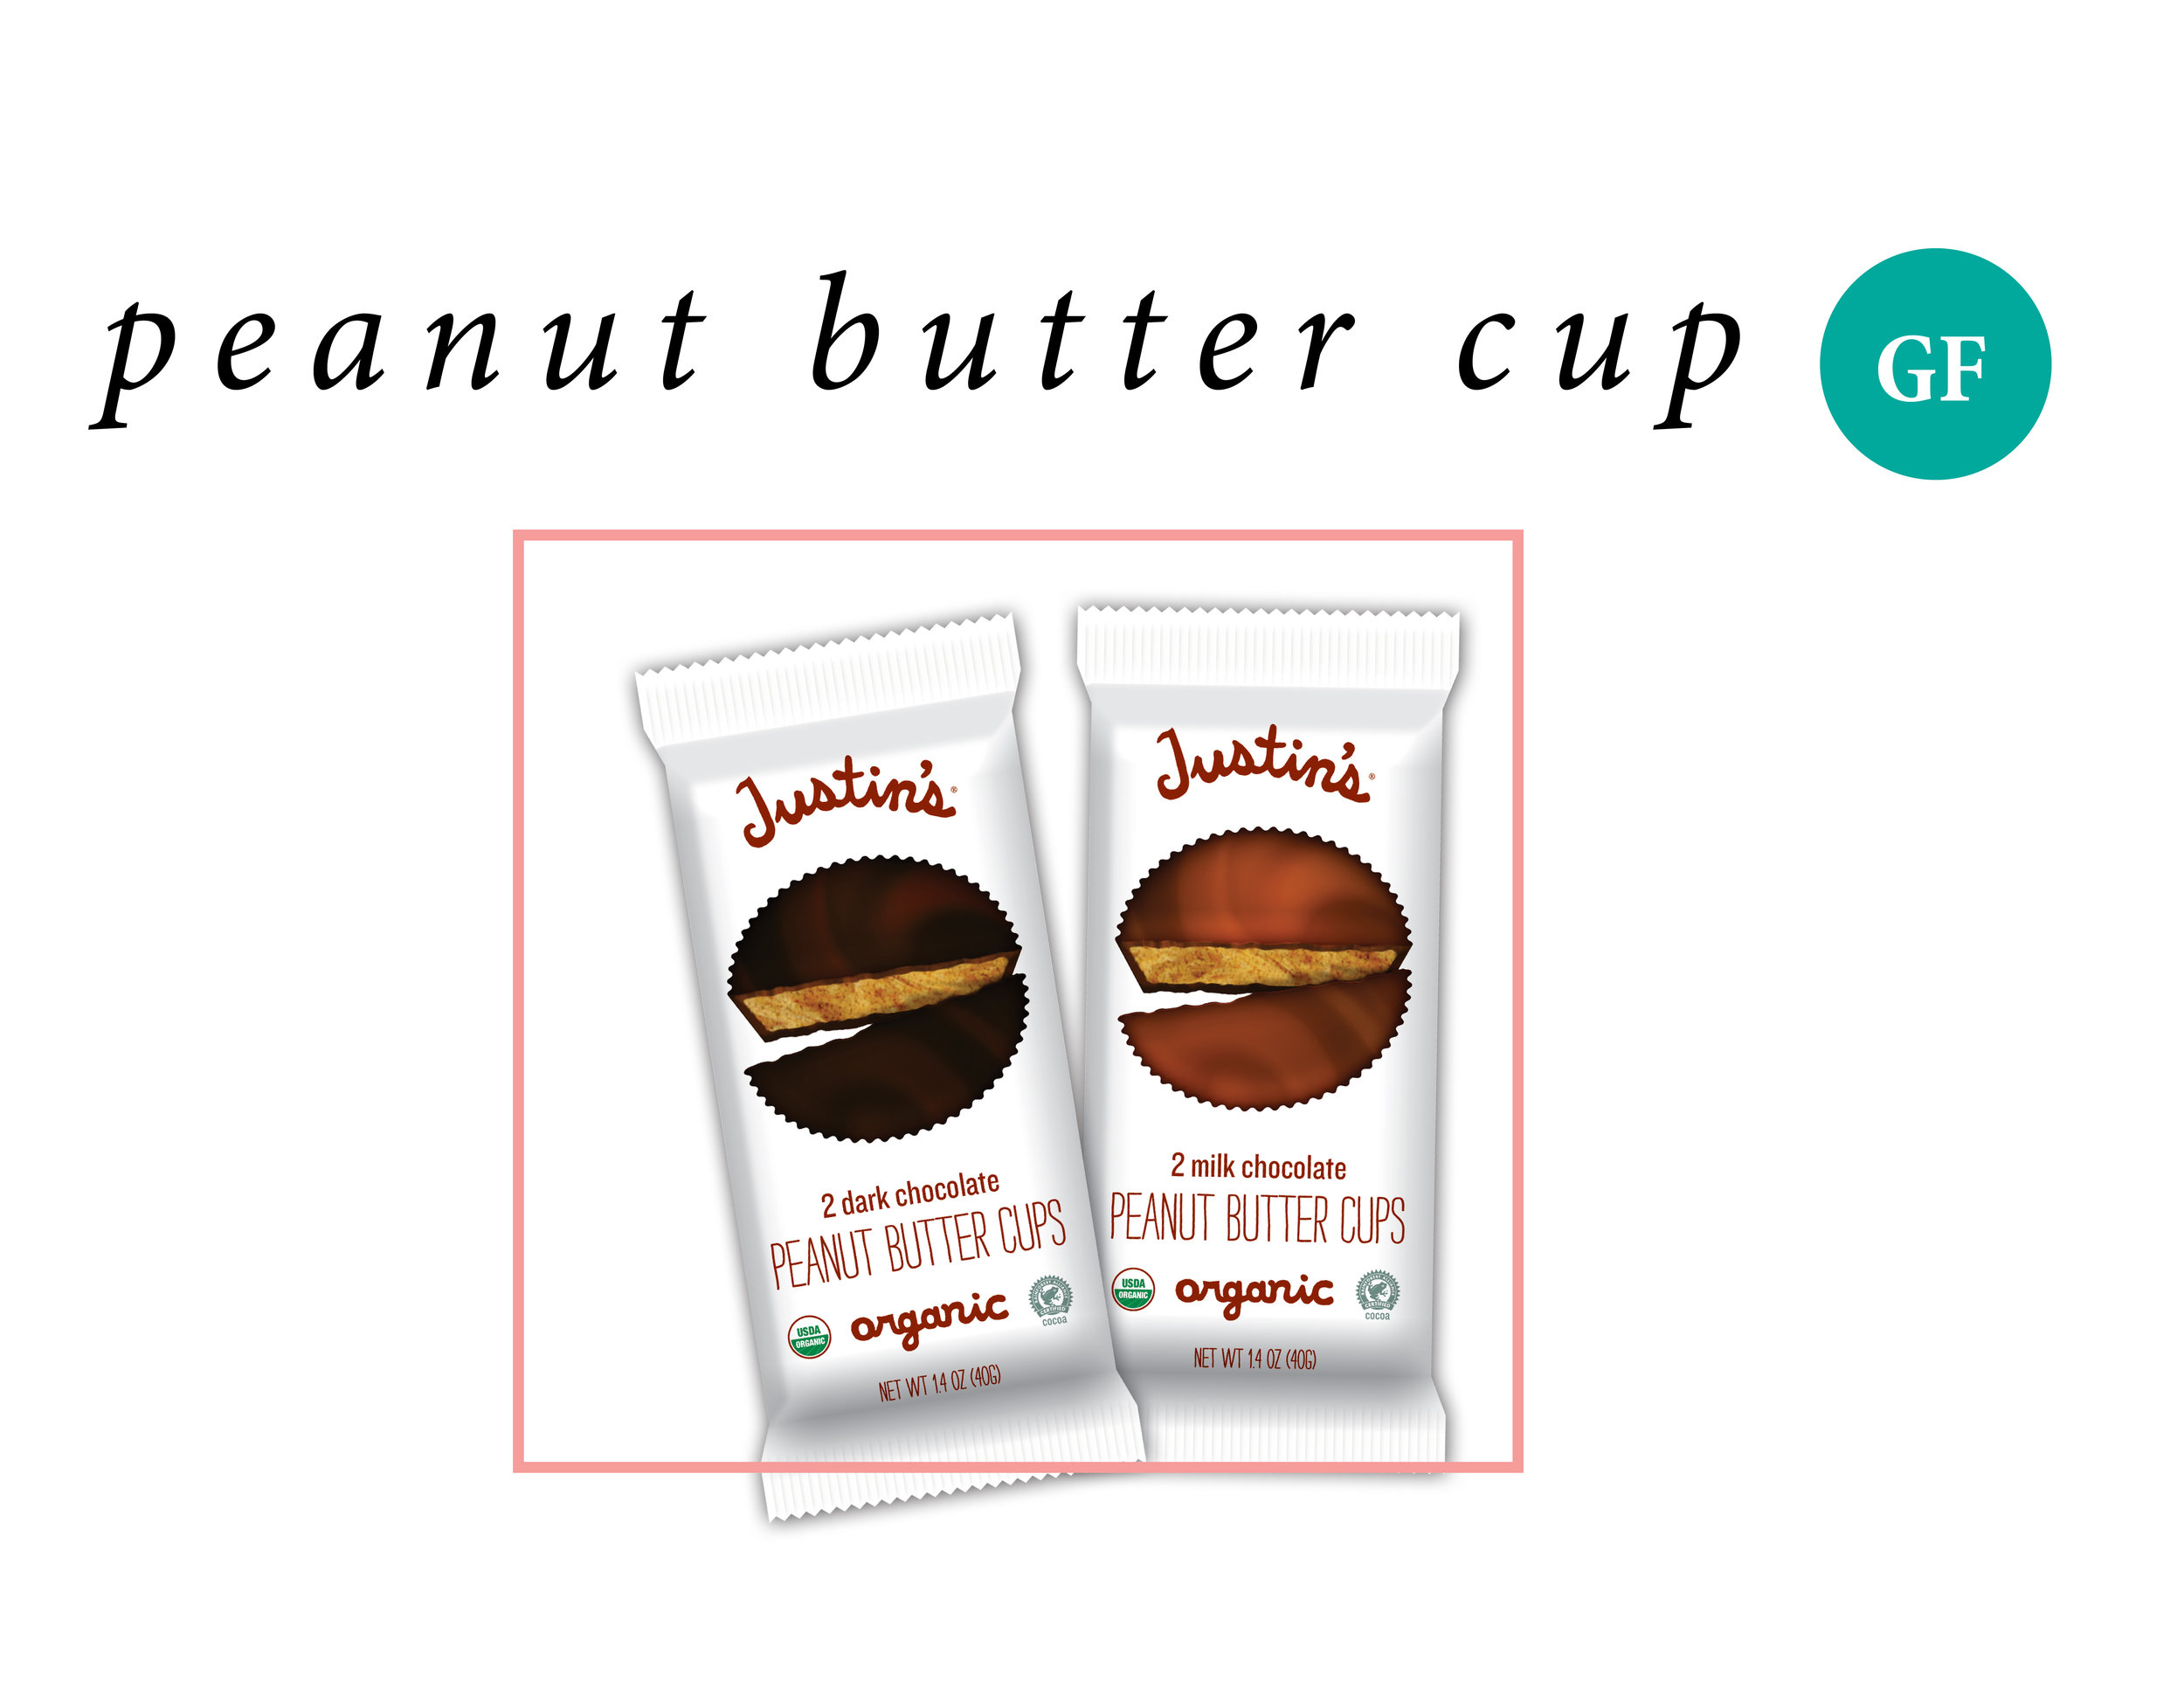  This is for all of my friends with a sweet tooth. I love peanut butter and chocolate so to know that this fun "candy like" snack is also healthy, makes me super happy. It tastes like the real thing to me! 